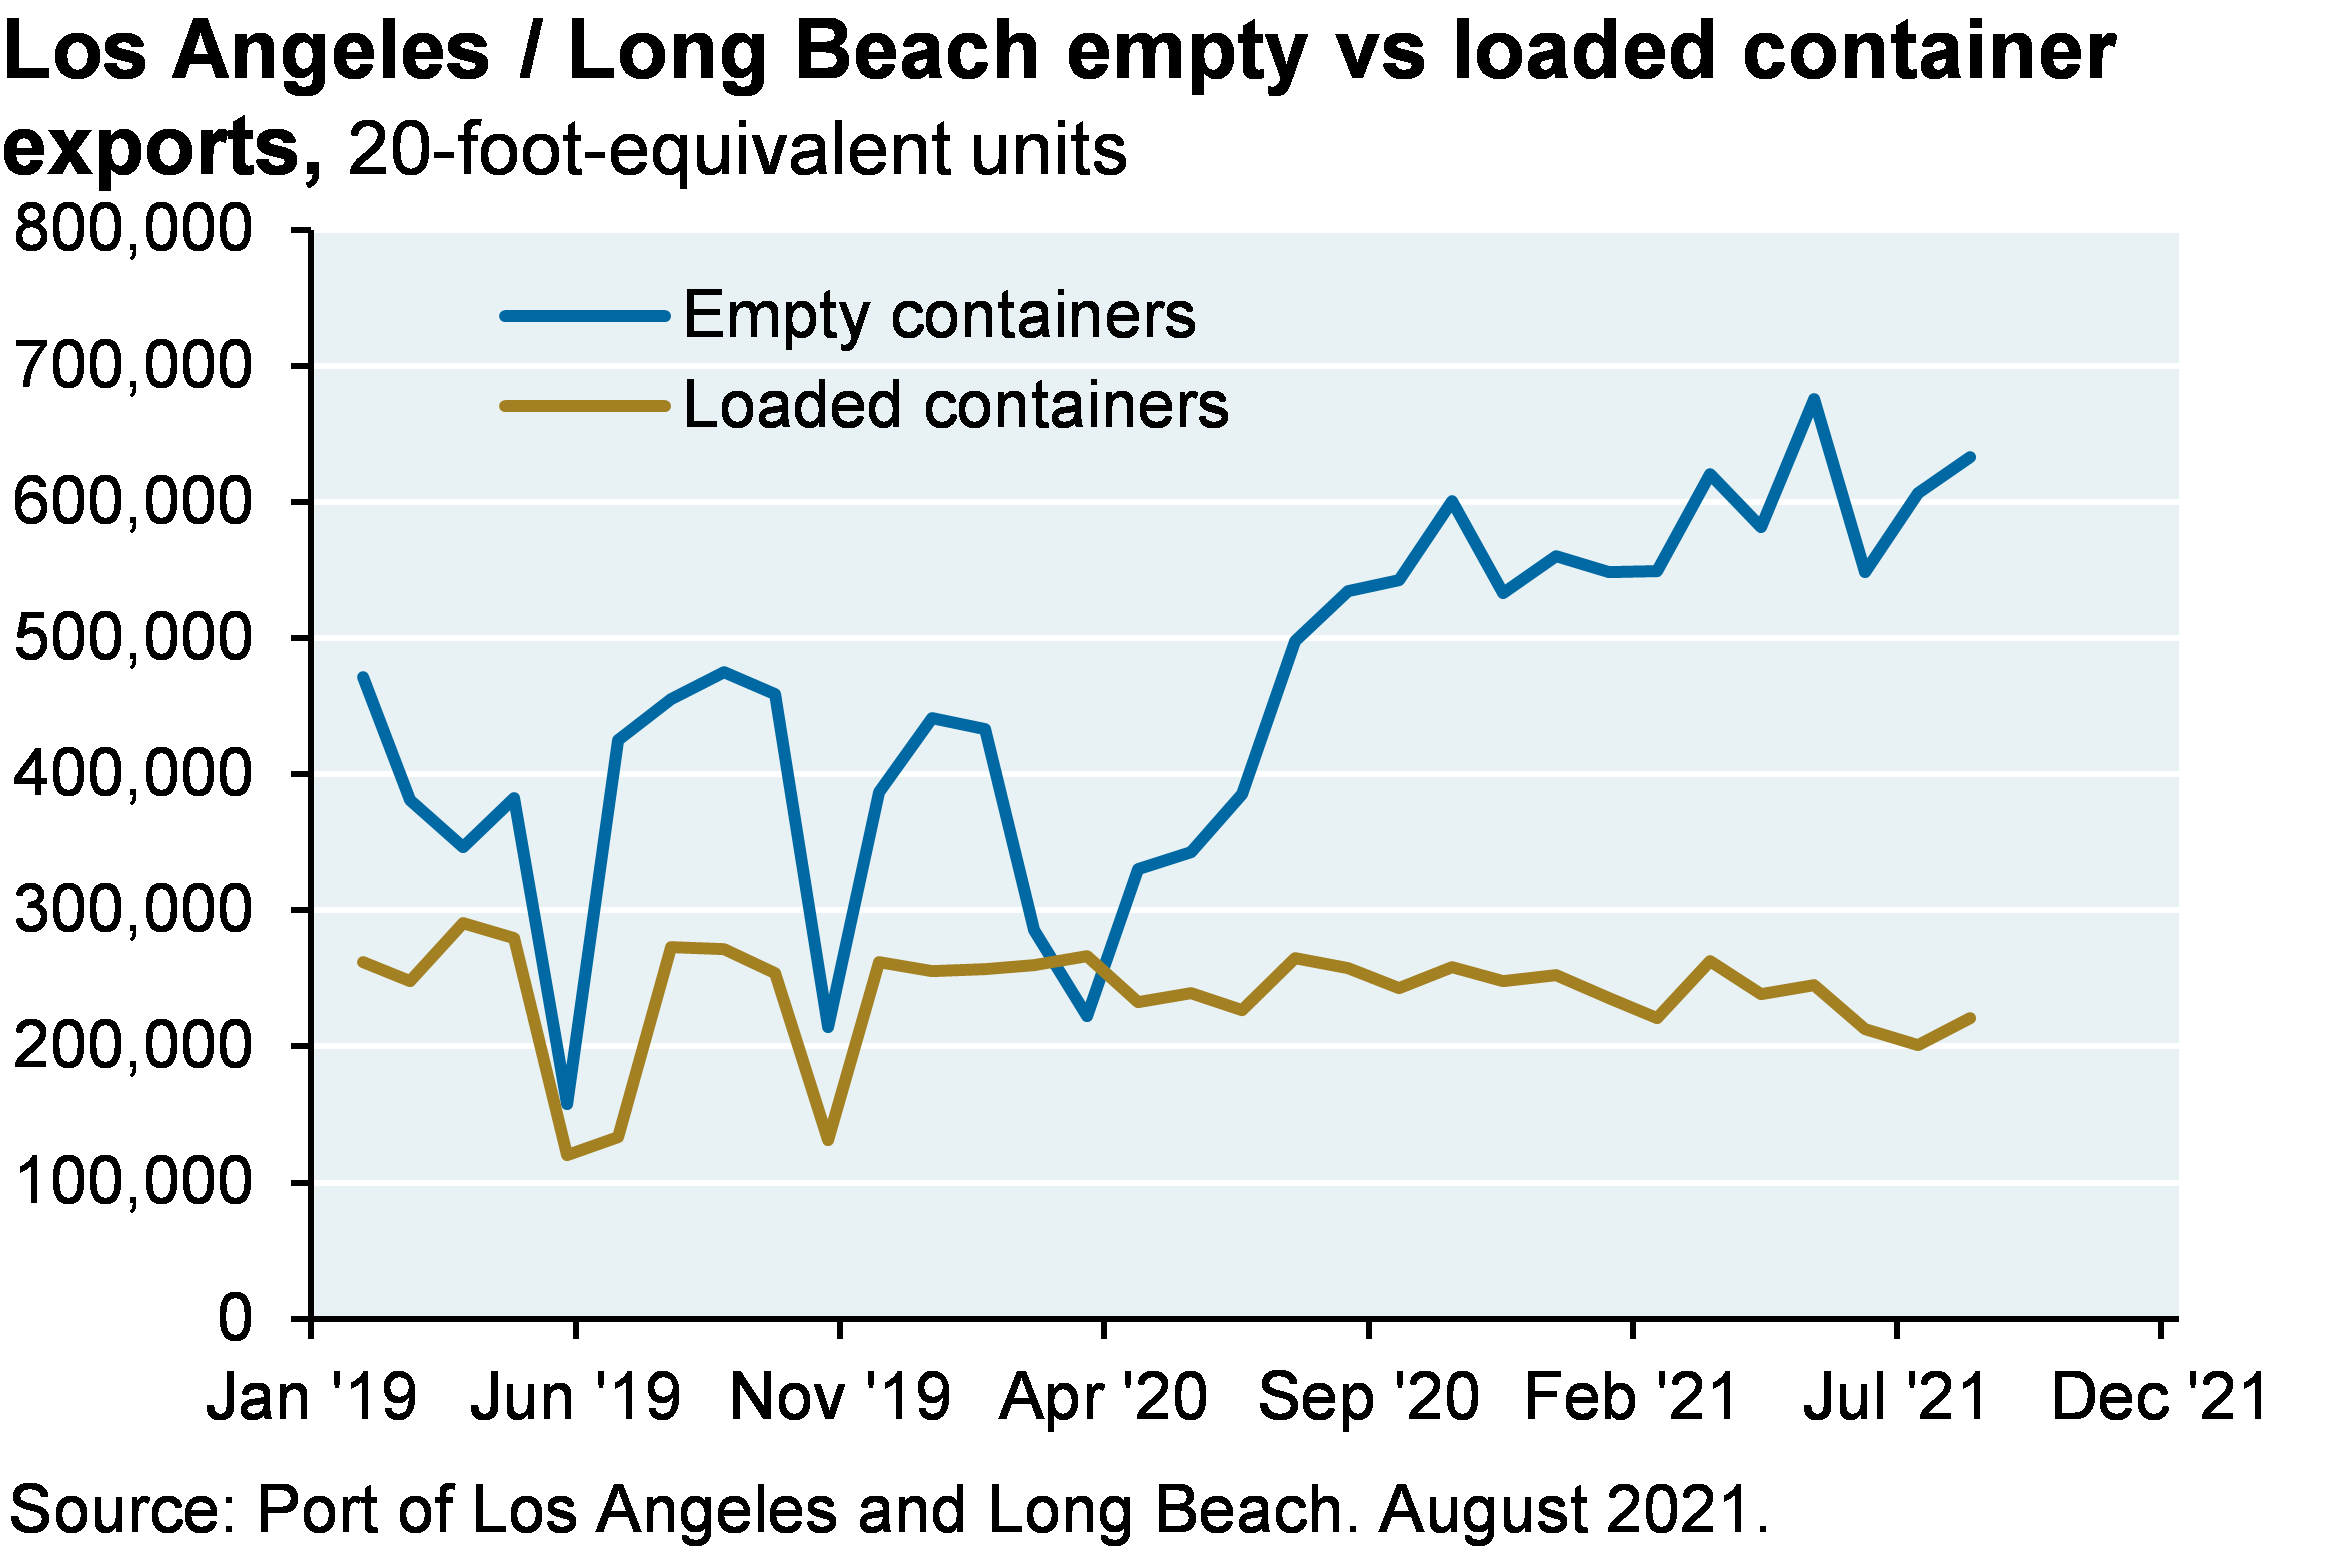 Line chart shows Los Angeles / Long Beach empty vs loaded container exports, shown as 20-foot-equivalent units. Loaded container exports has stayed relatively constant at around 200,000 20-foot-equivalent units, while empty containers has spiked to around 600,000 20-foot equivalent units.